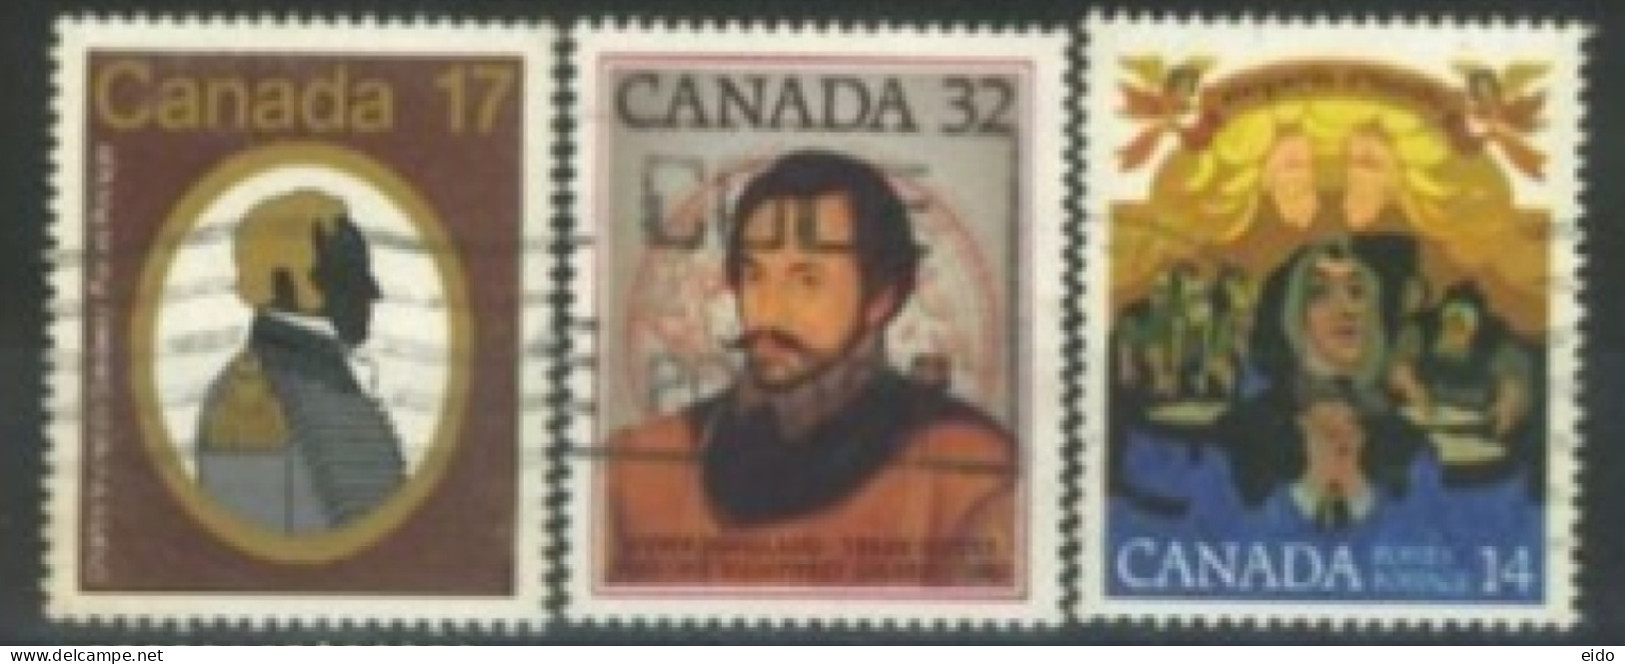 CANADA - 1978/83, MARGUERITE D'YOUVILLE COMMEMORATION, CHARLES MICHEL & SIR HUMPHREY. STAMPS SET OF 3, USED. - Gebraucht